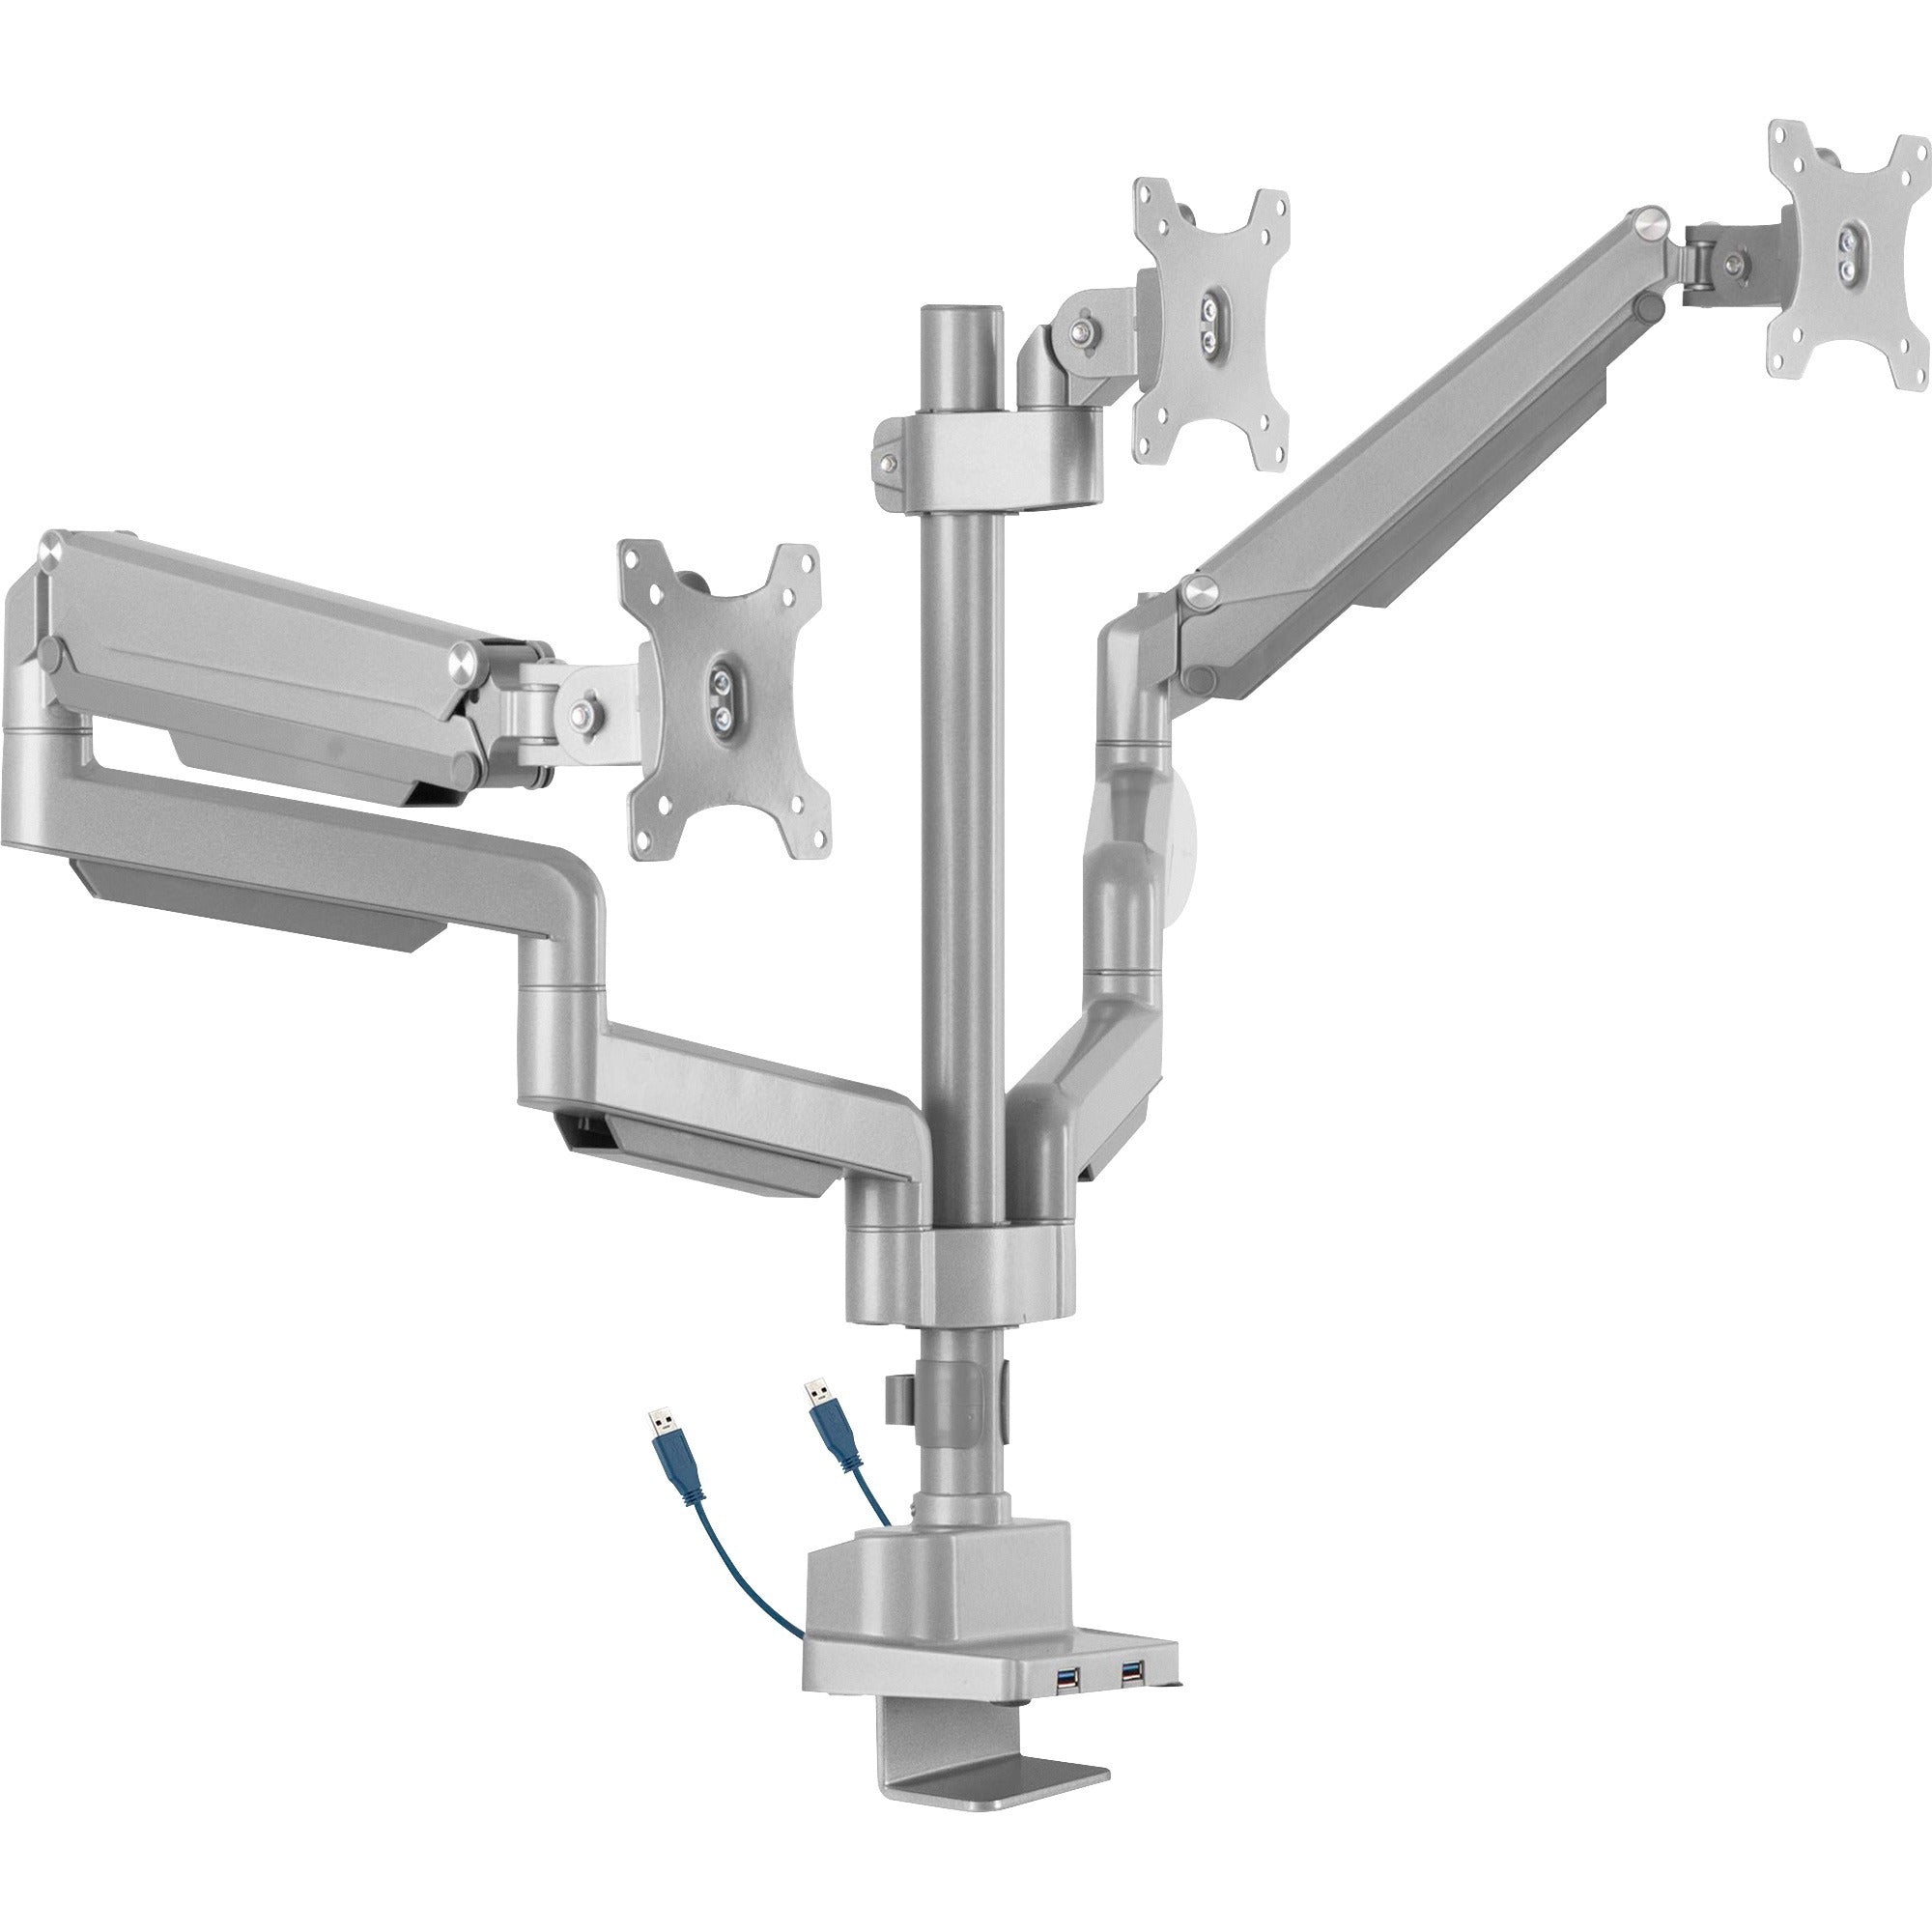 lorell-mounting-arm-for-monitor-gray-height-adjustable-3-displays-supported-1540-lb-load-capacity-75-x-75-100-x-100-1-each_llr99804 - 1